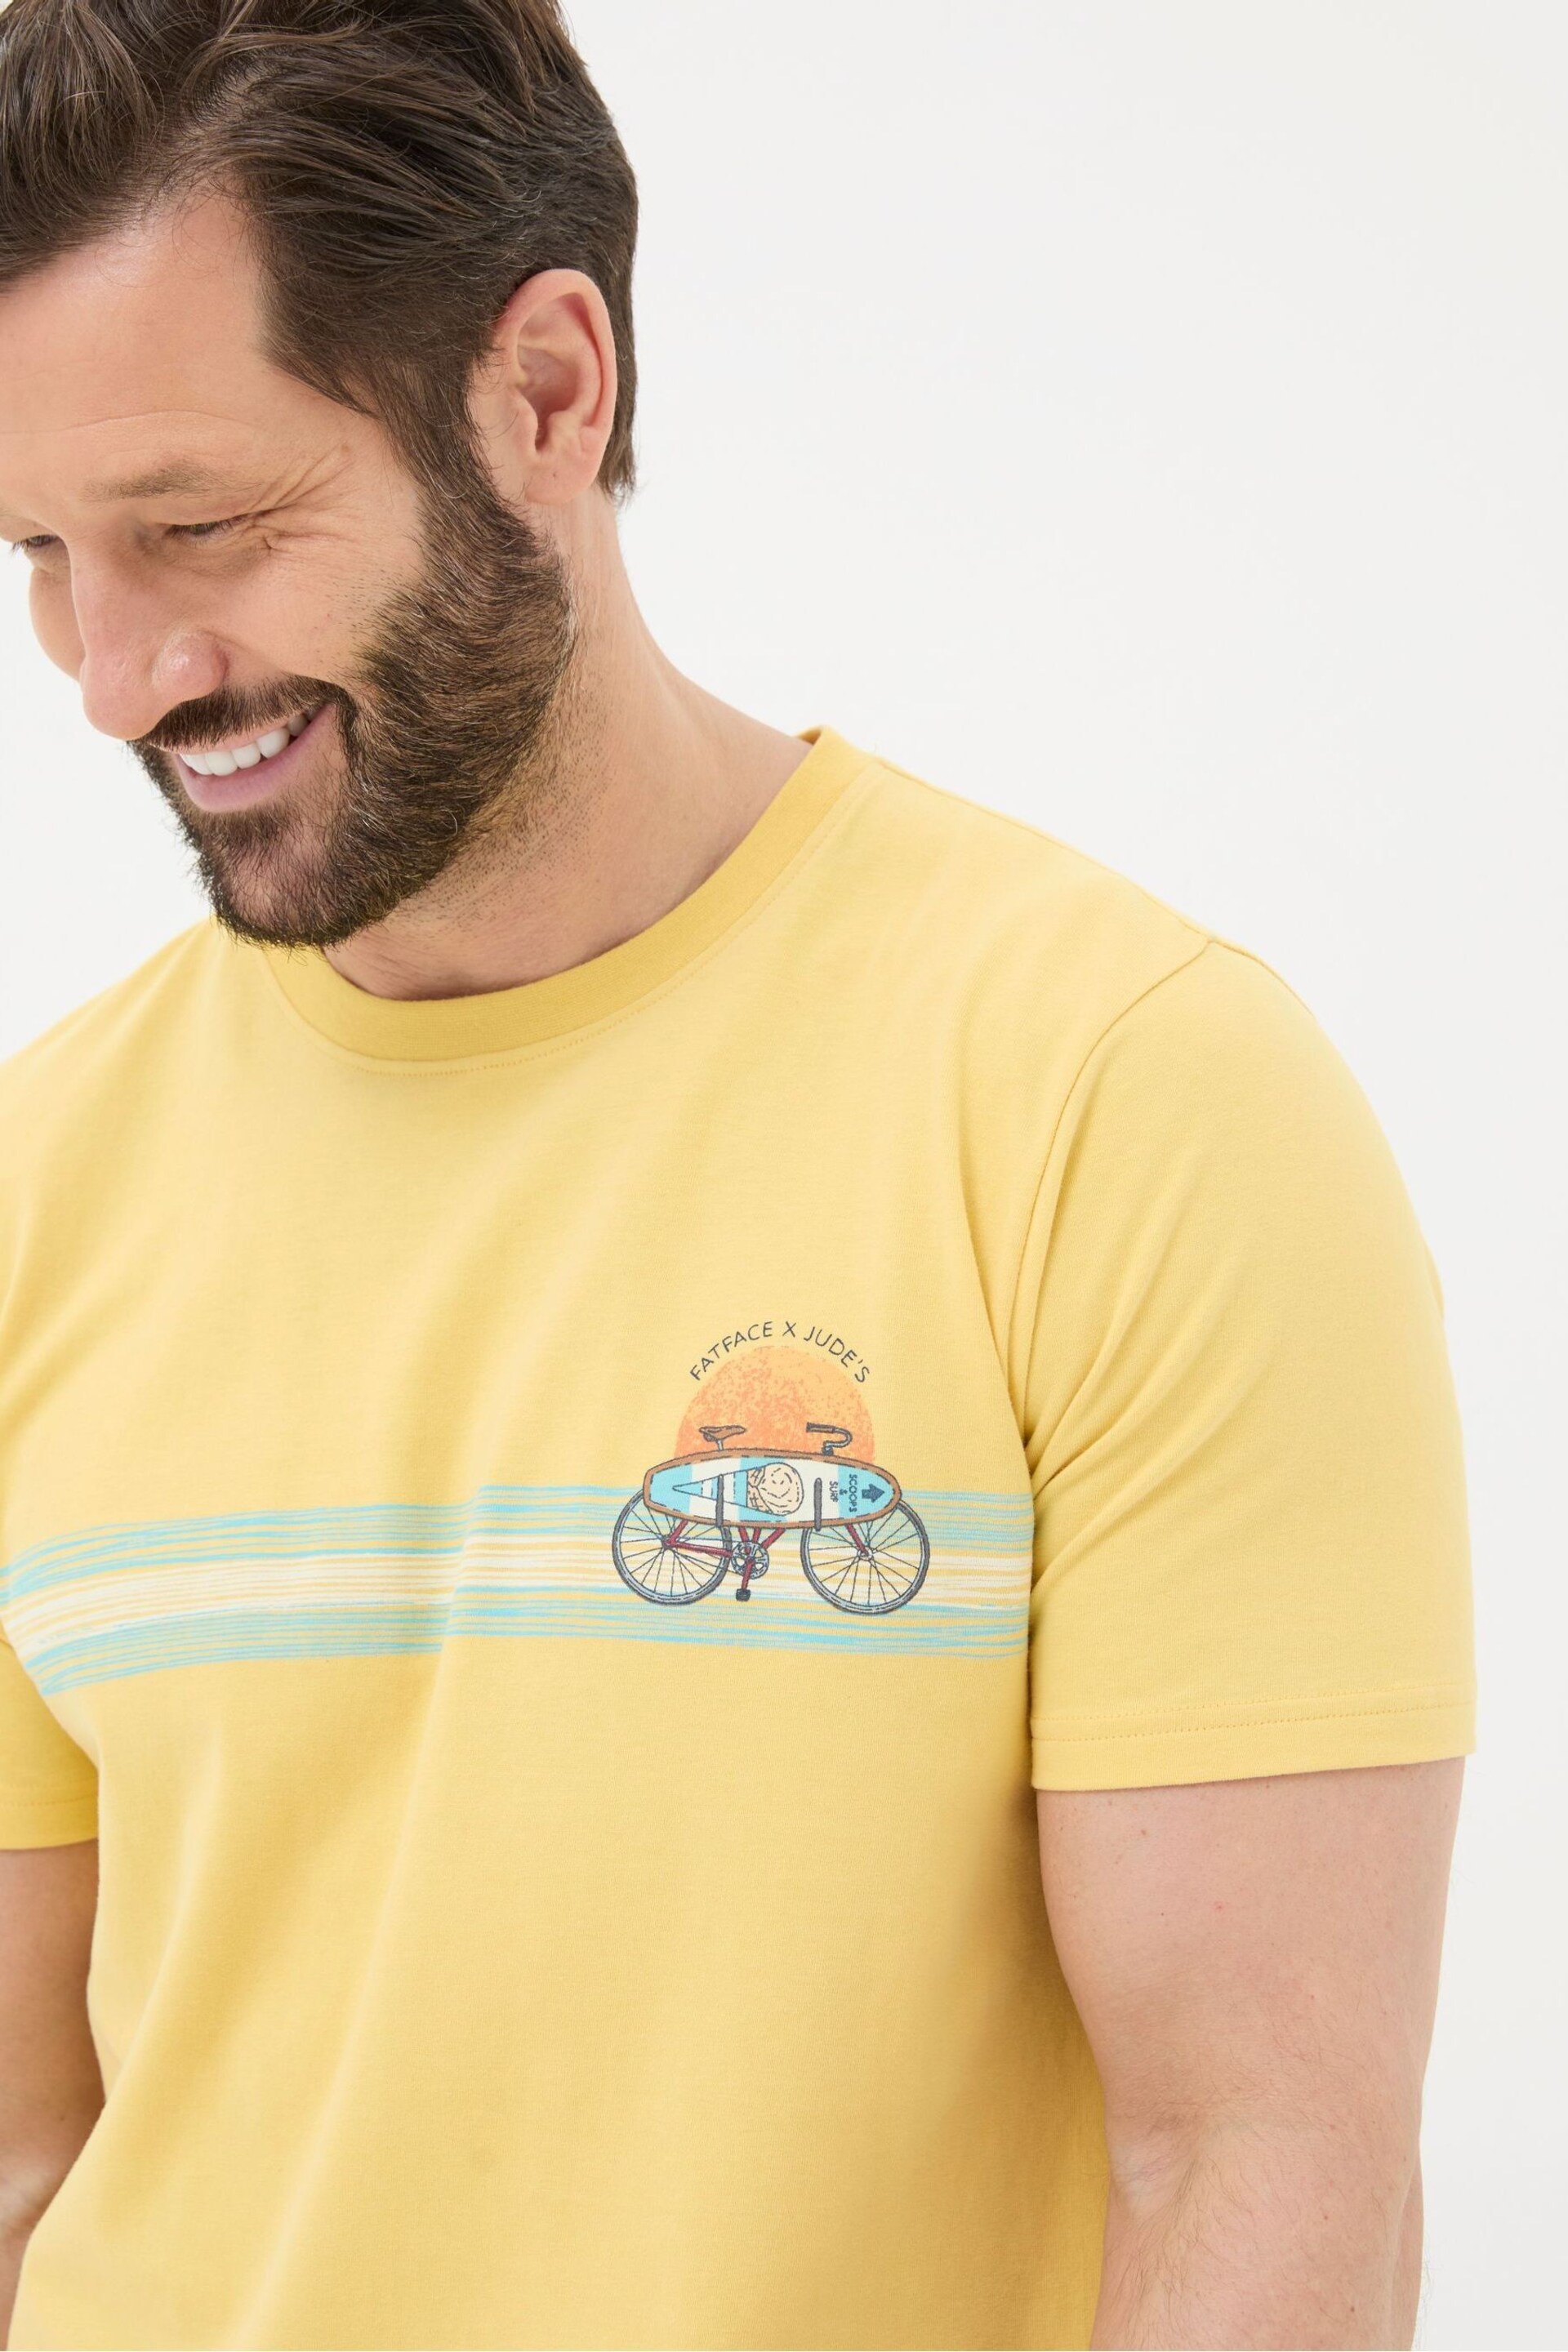 FatFace Yellow Chest Stripe T-Shirt - Image 4 of 5